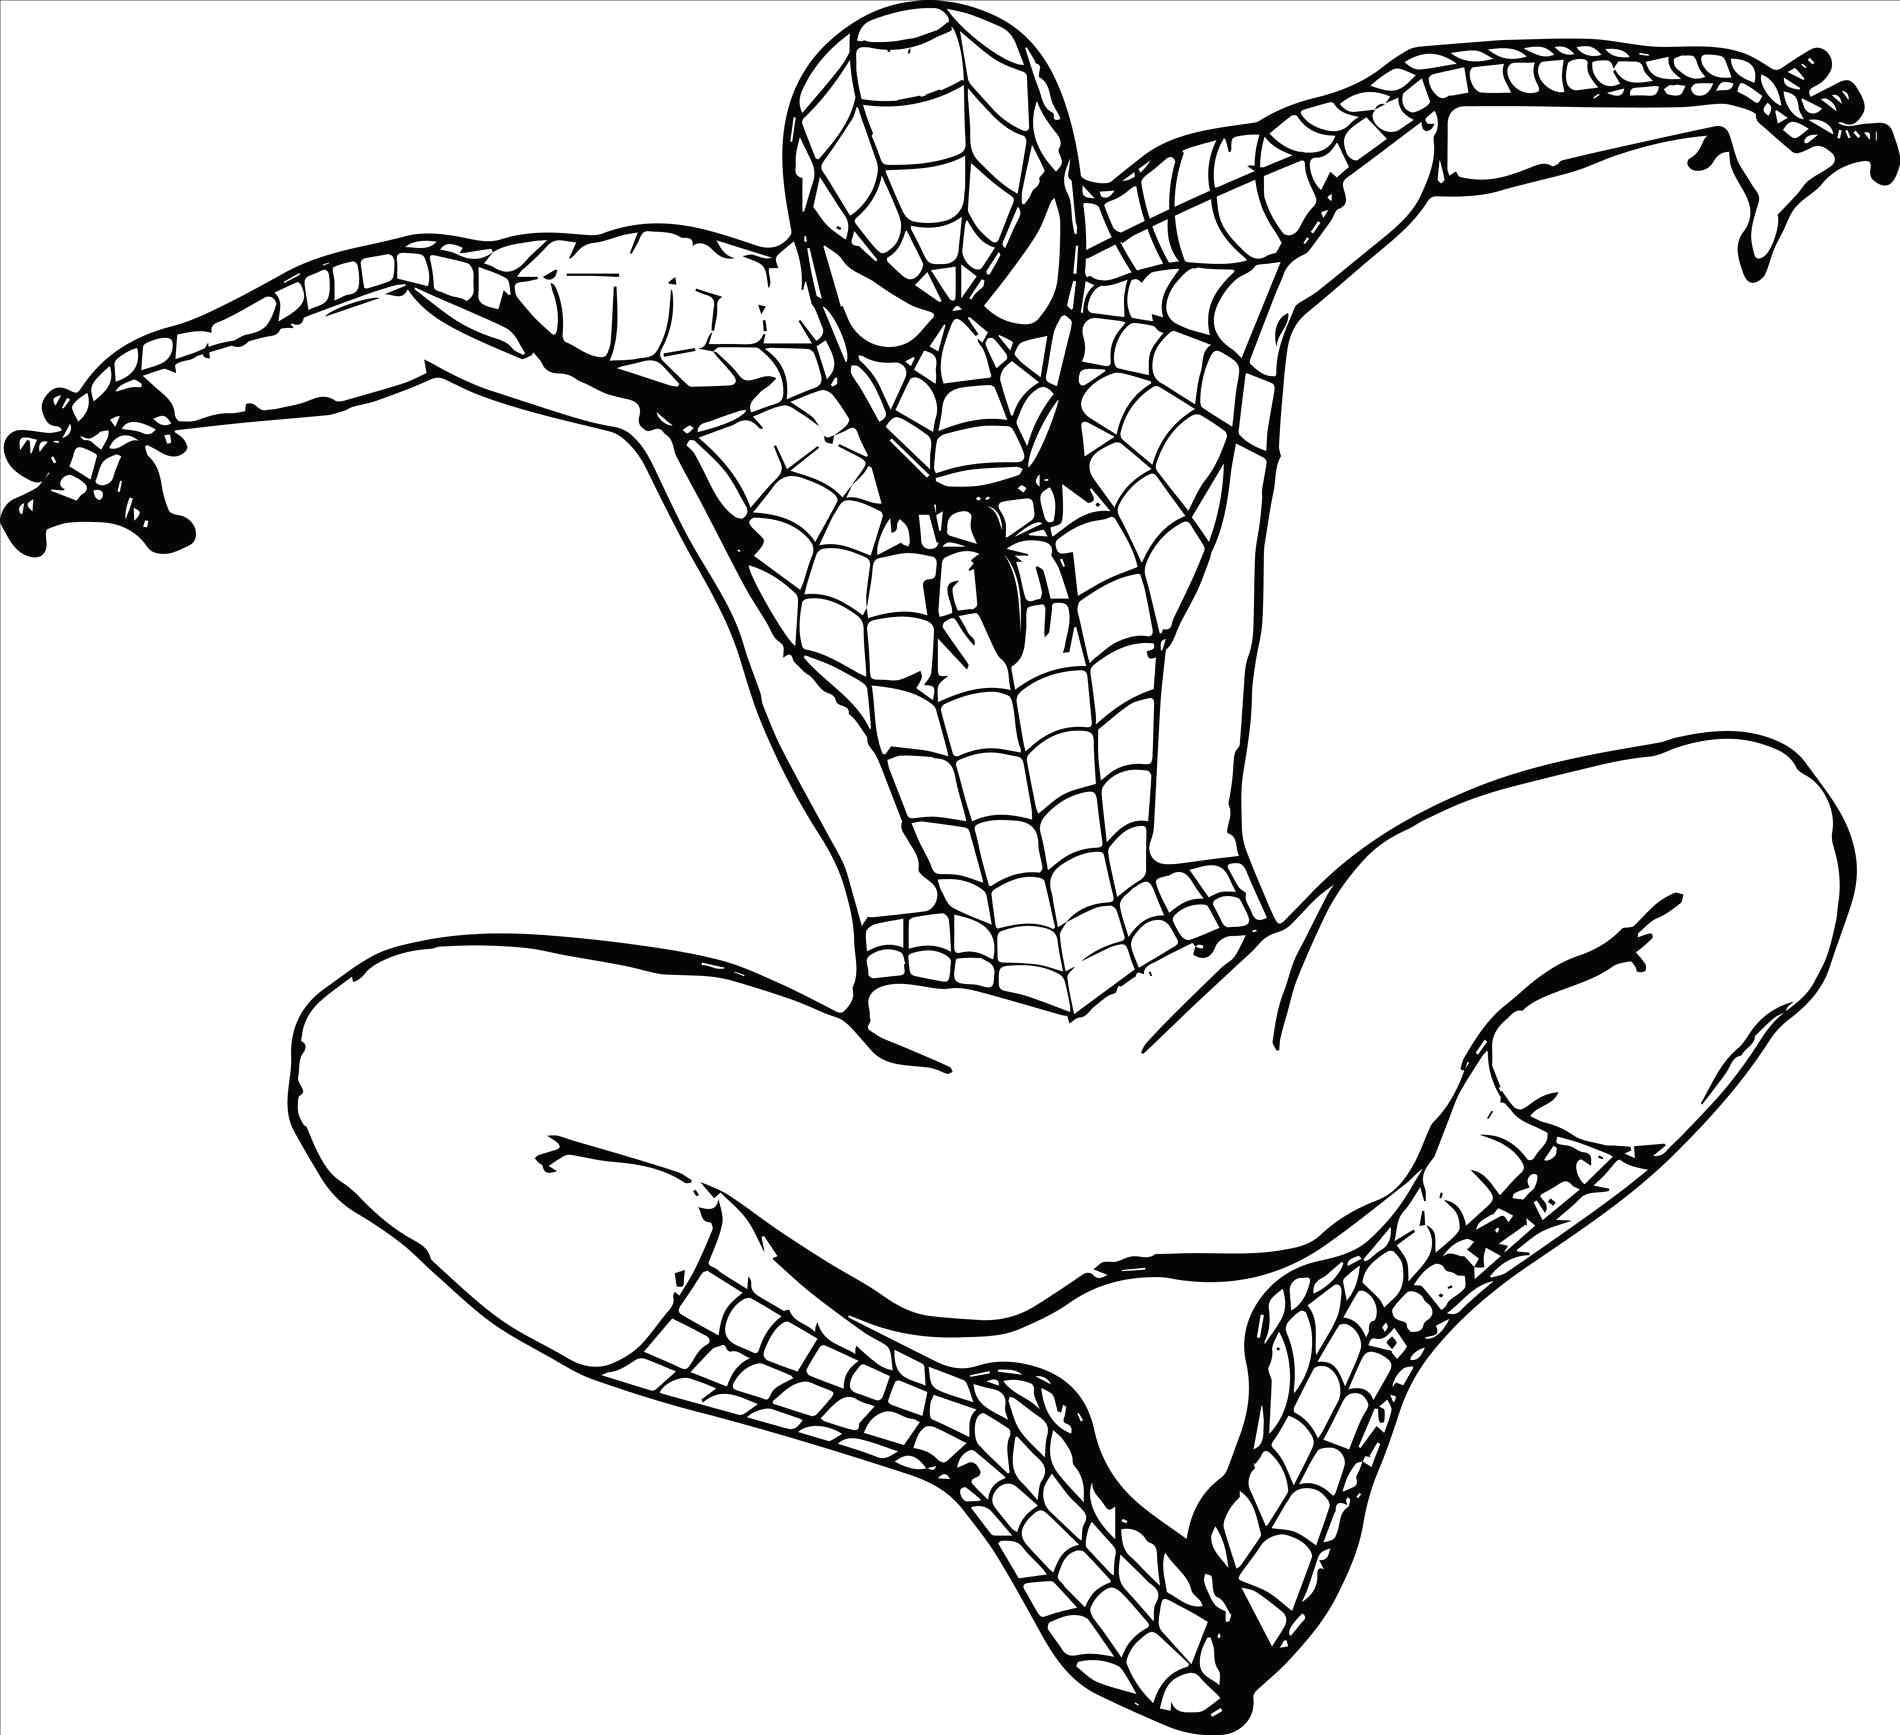 Easy Valentine Drawings Superheroes Easy to Draw Spiderman Coloring Pages Luxury 0 0d